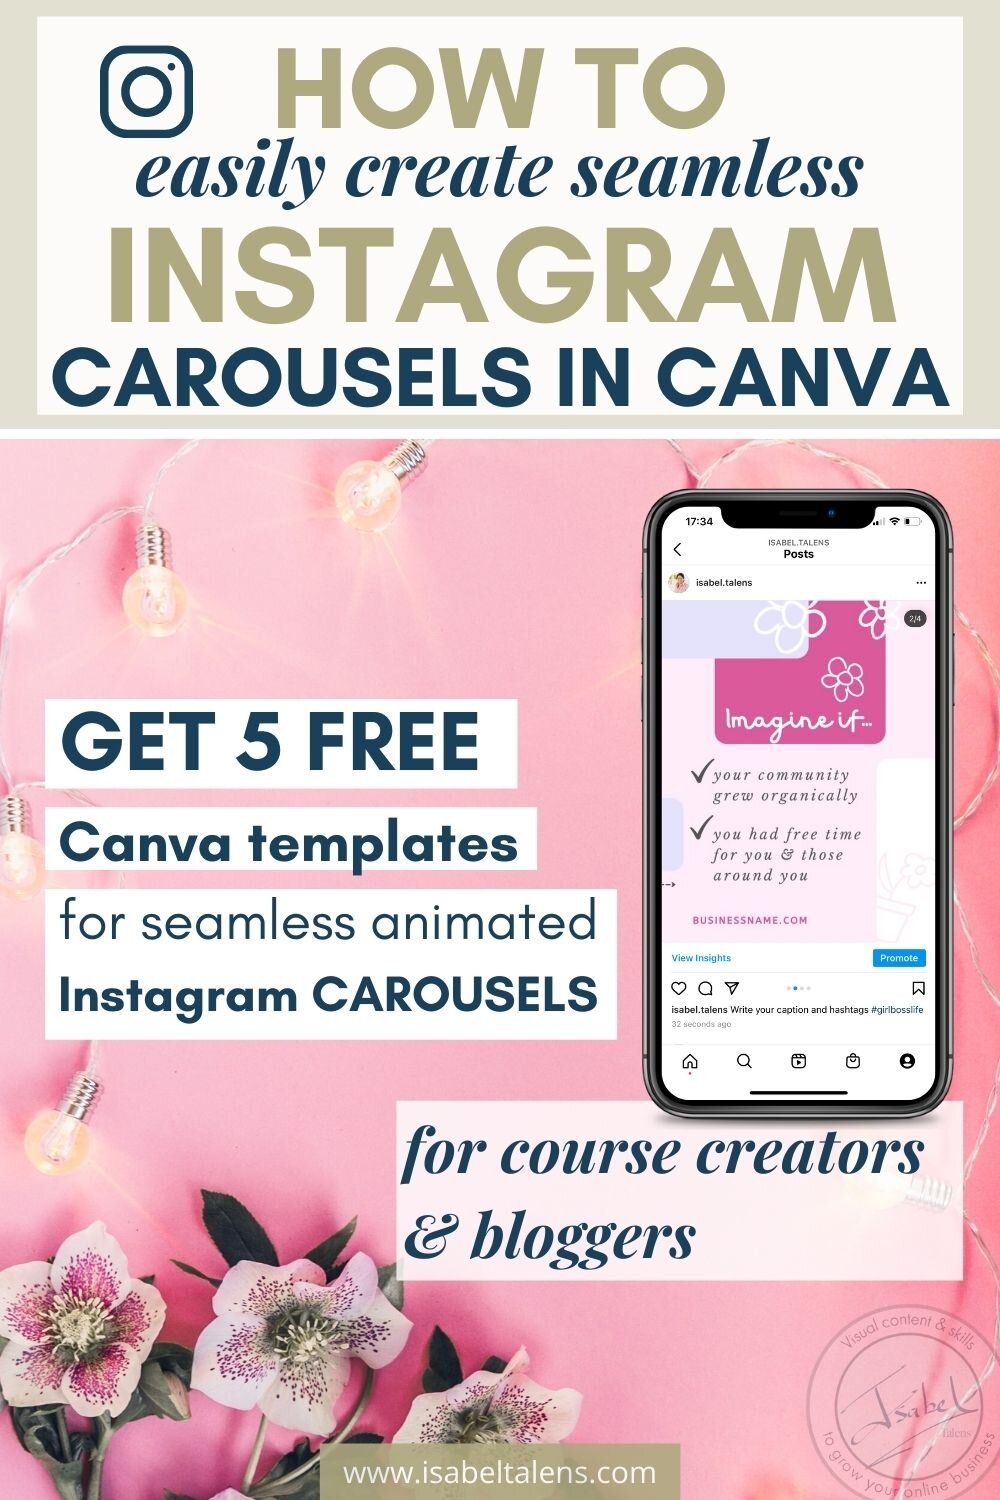 5 Unique Ways to Animate Text in Canva to Make Your Instagram